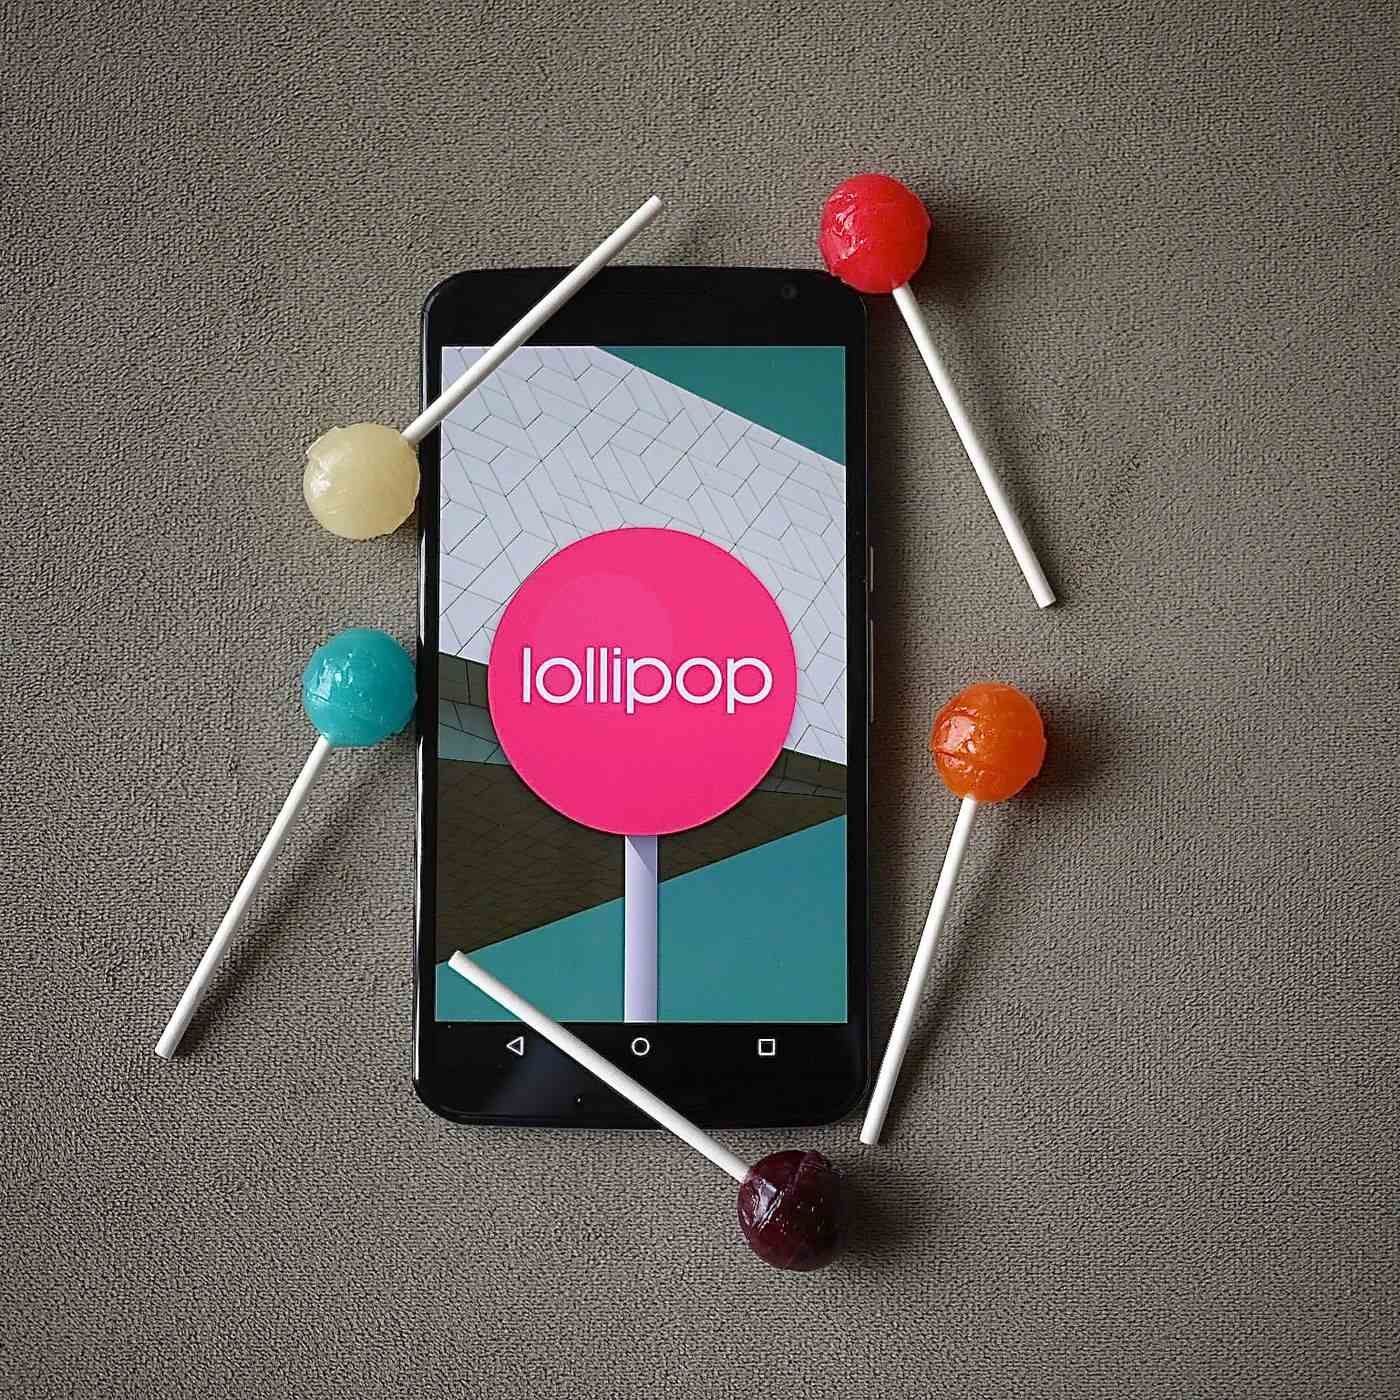 android-5-0-lollipop-which-phones-are-getting-it-and-when